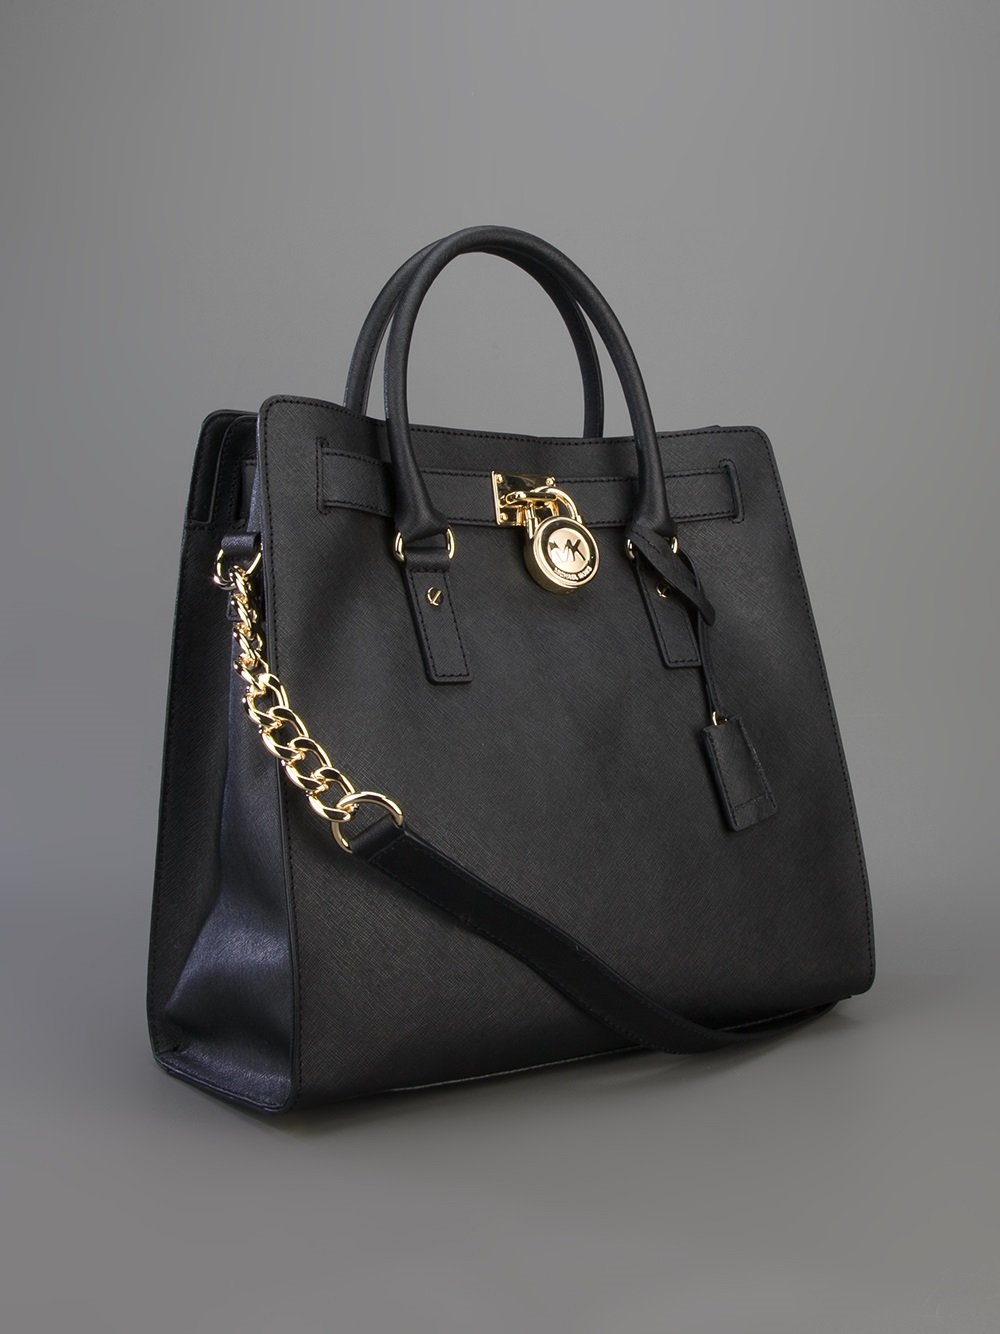 FREE DELIVERY Michael Kors Hamilton Large Tote